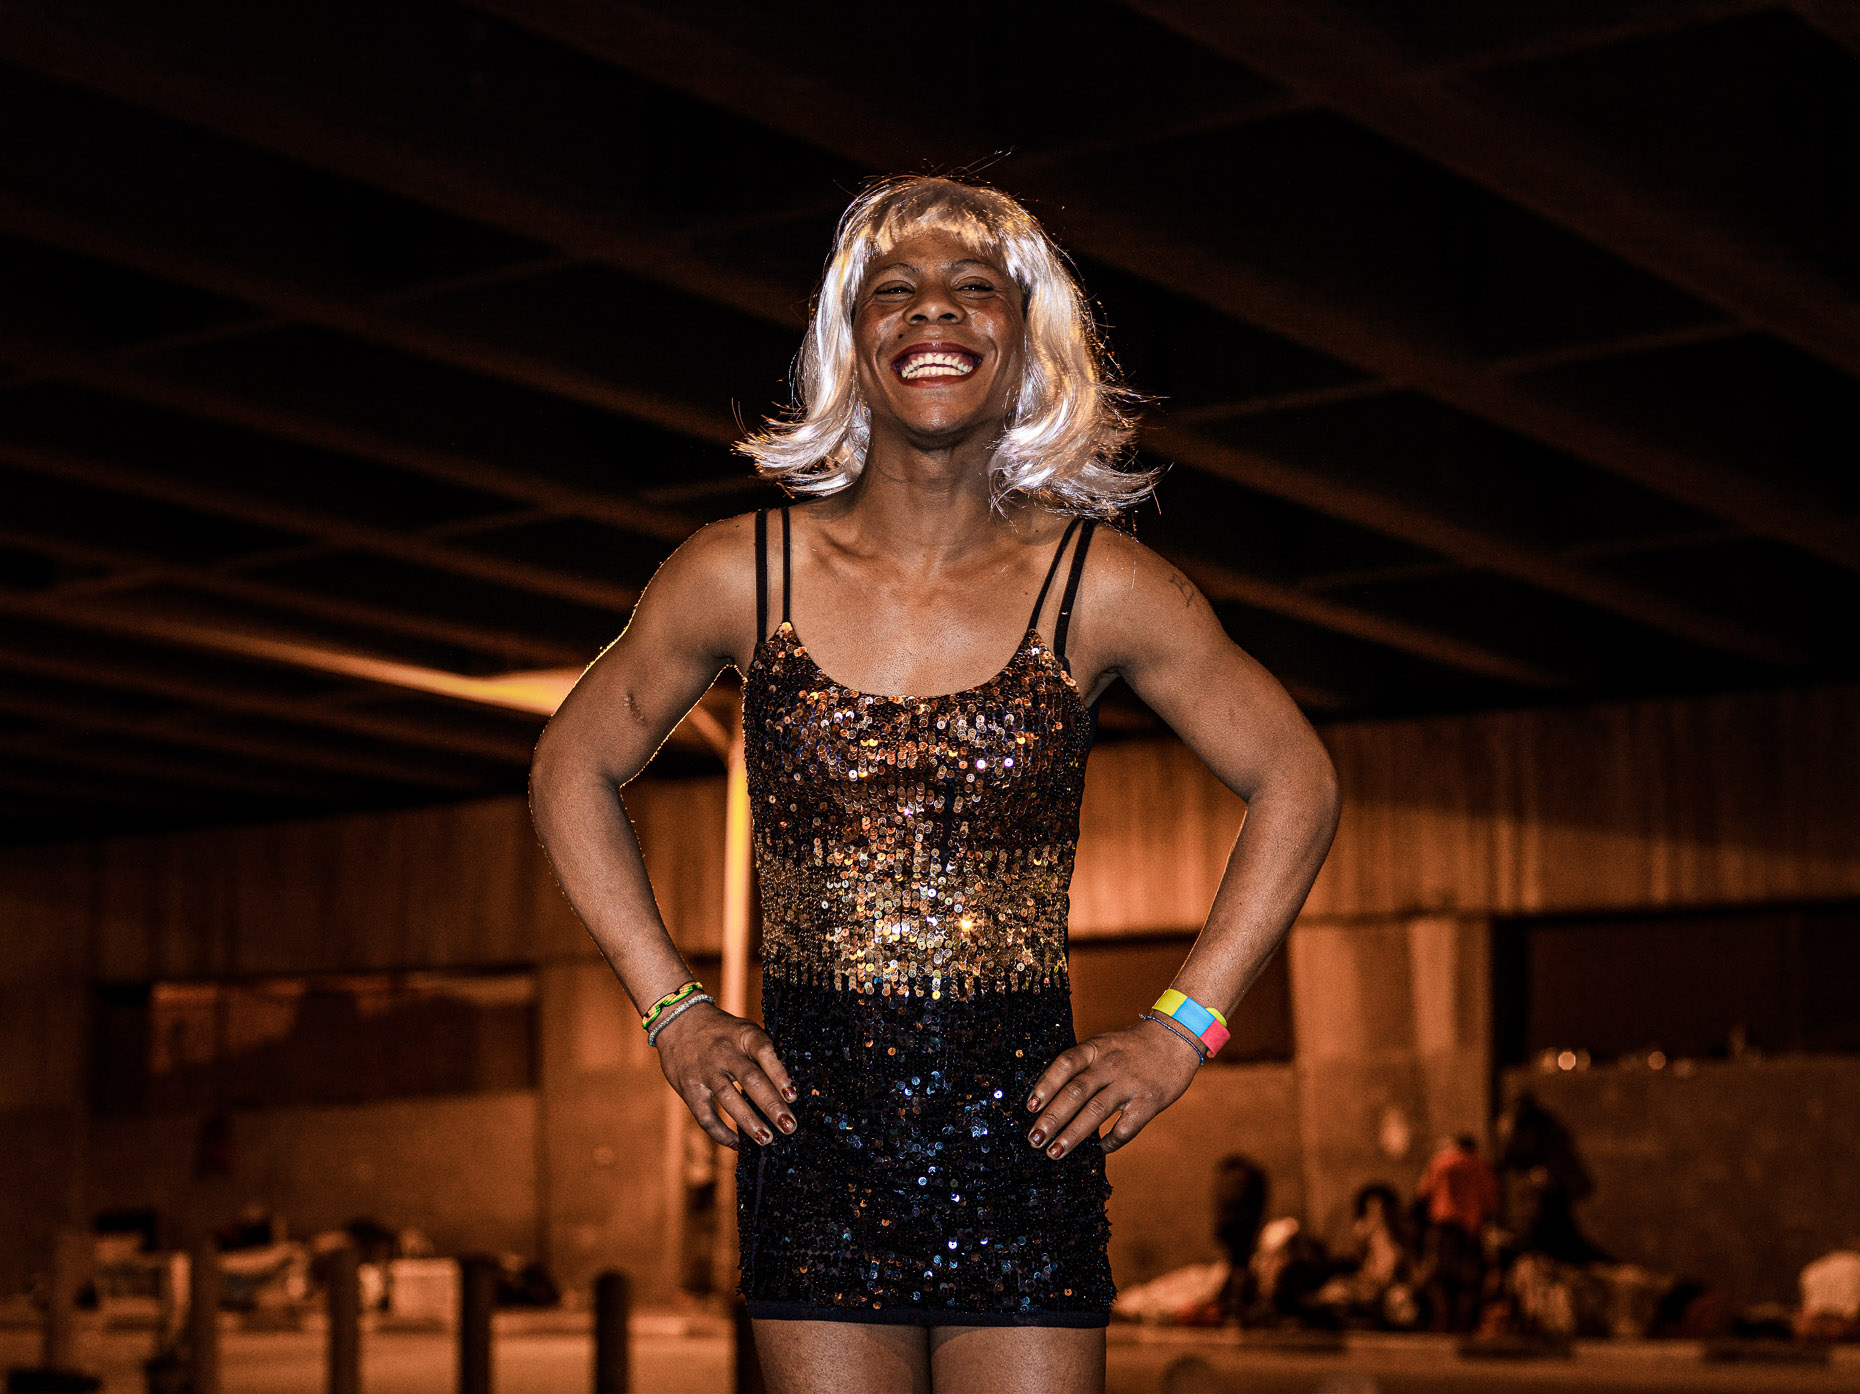  A trans woman with blonde wig laughing and posing for her portrait, under the bridge she calls home. 